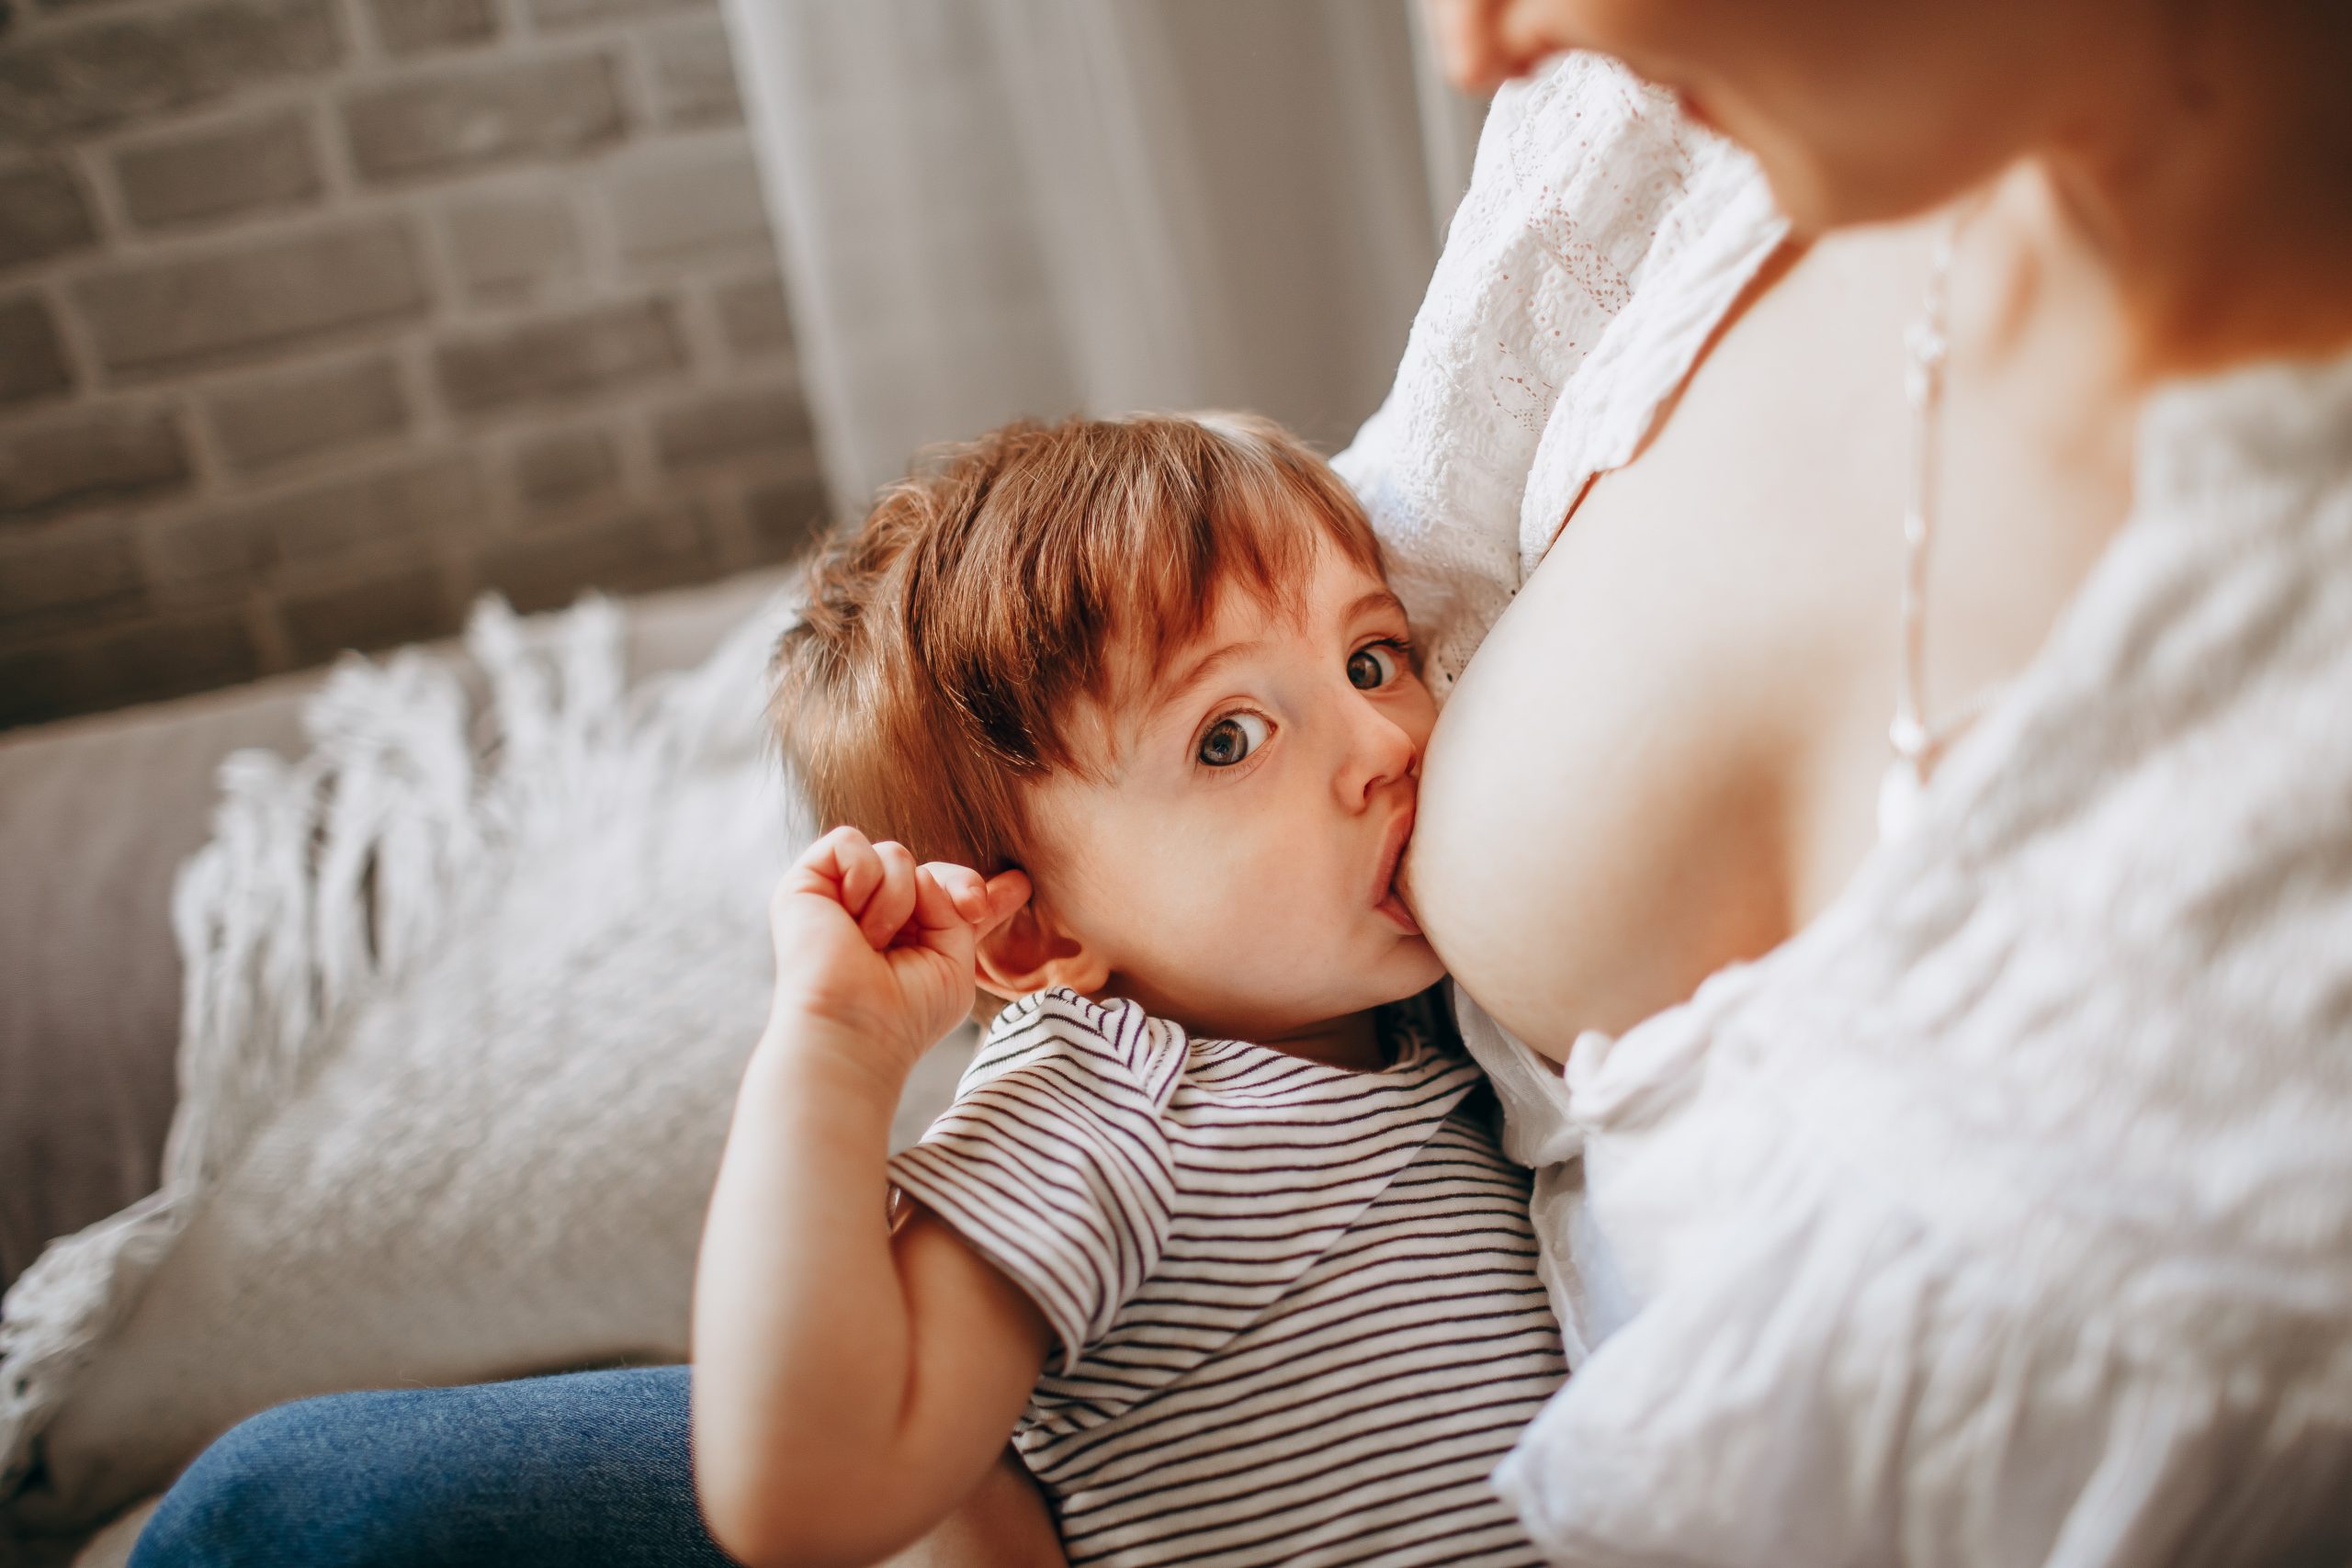 Breastfeeding Benefits for Both Mother and Baby: What Every Expectant Mom Should Know